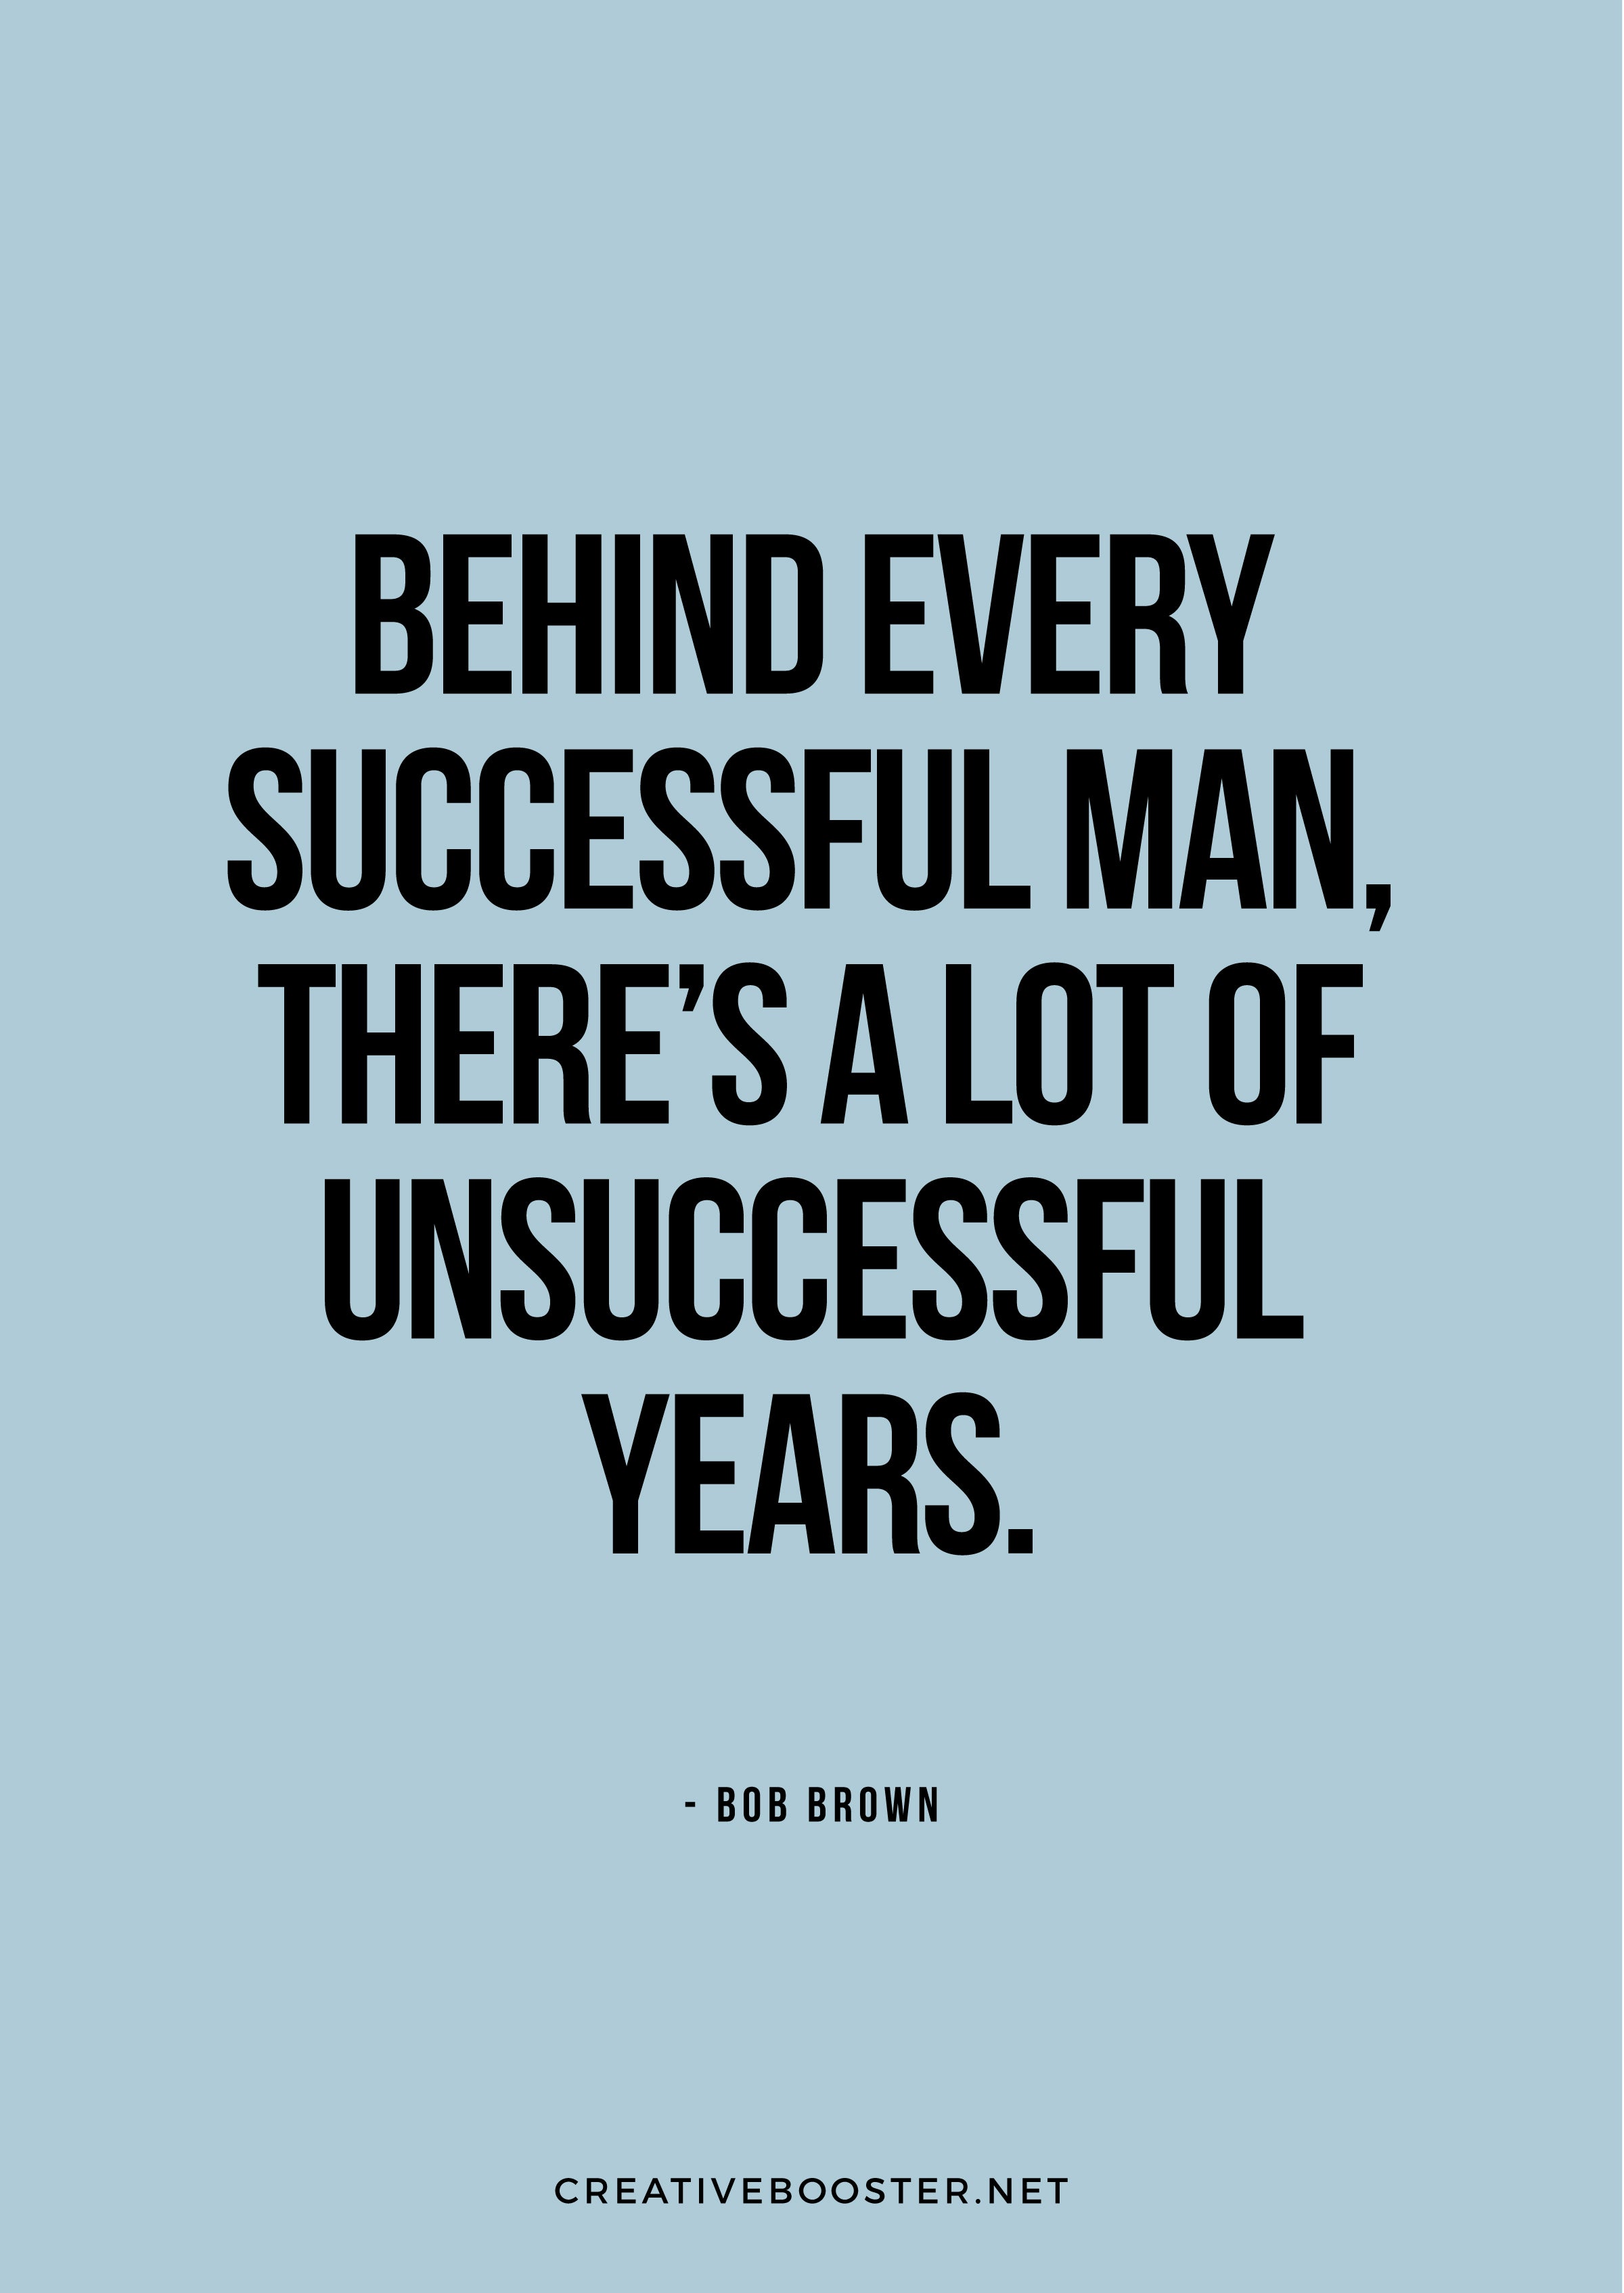 You-Got-This-Quotes-For-Him-“Behind every successful man, there’s a lot of unsuccessful years.” – Bob Brown (Quote Art Print)